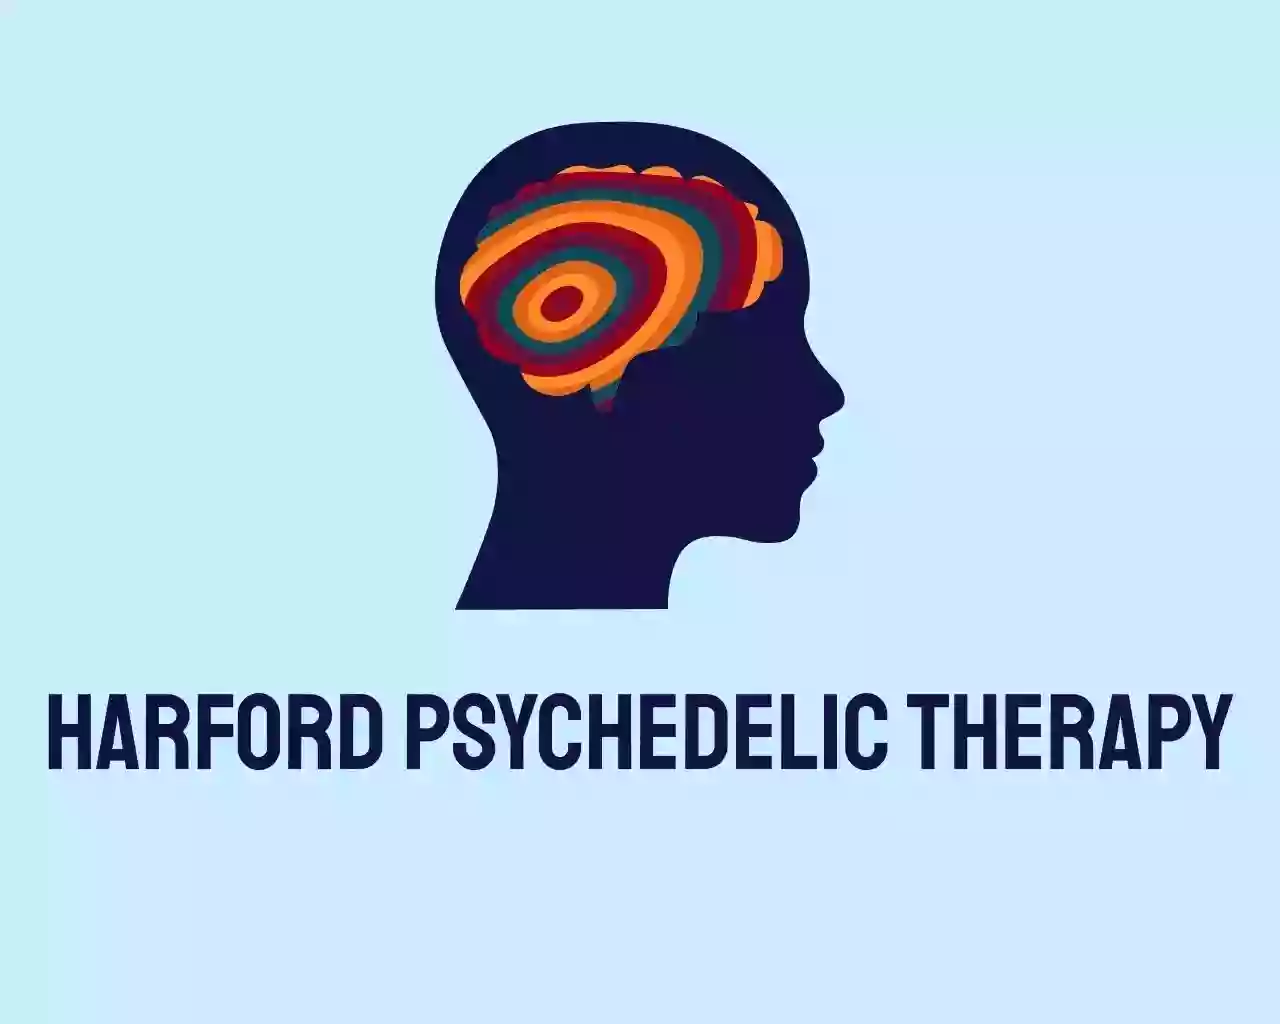 Harford Psychedelic Therapy, LLC